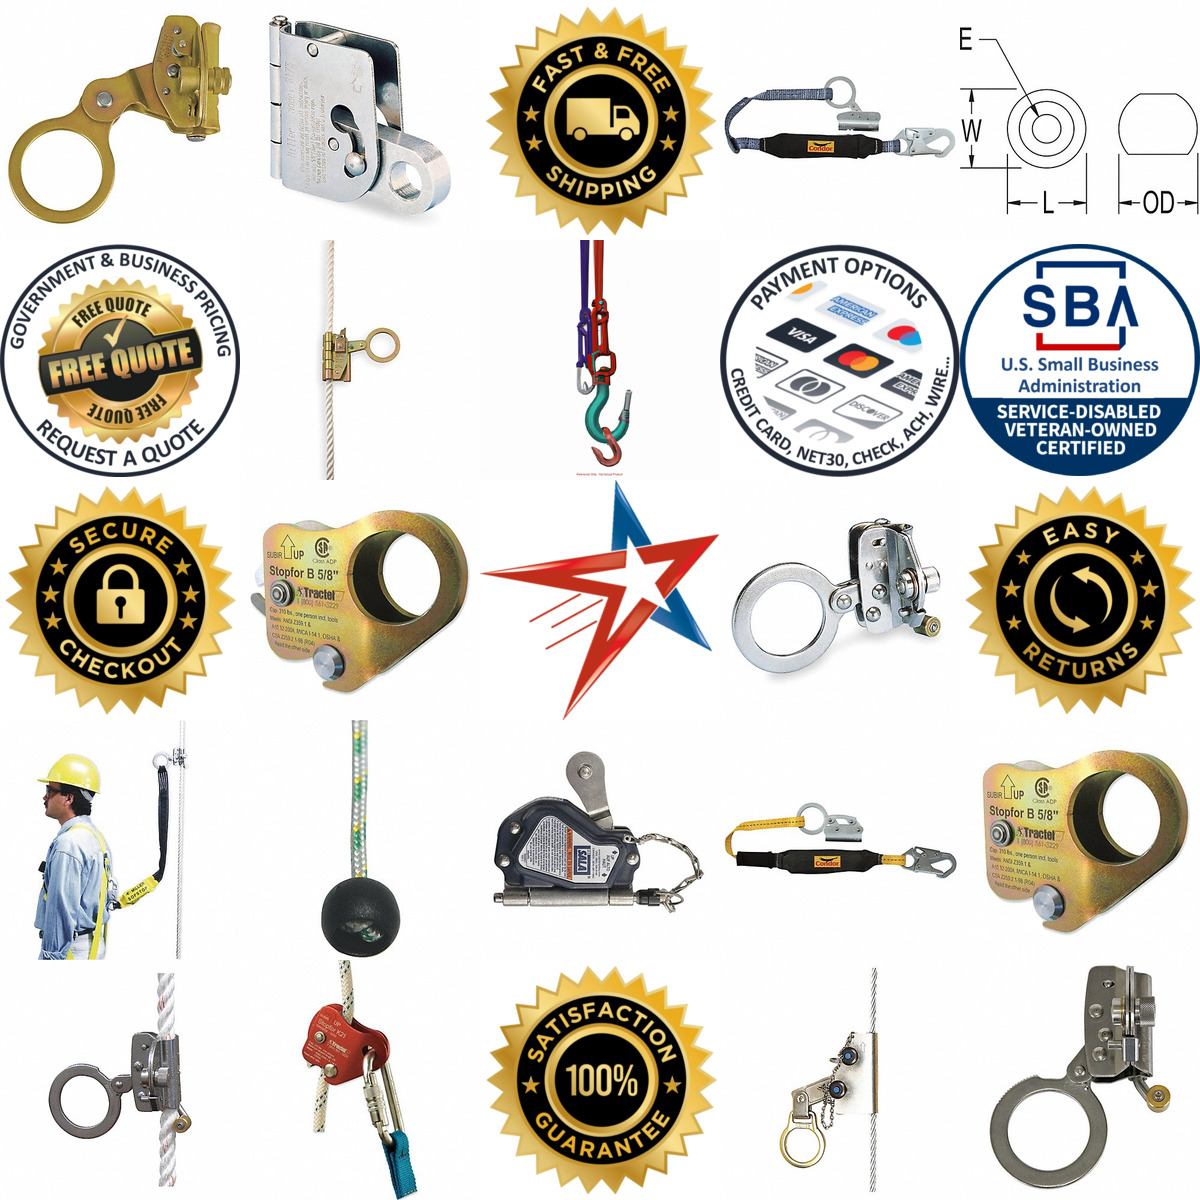 A selection of Rope Grabs products on GoVets